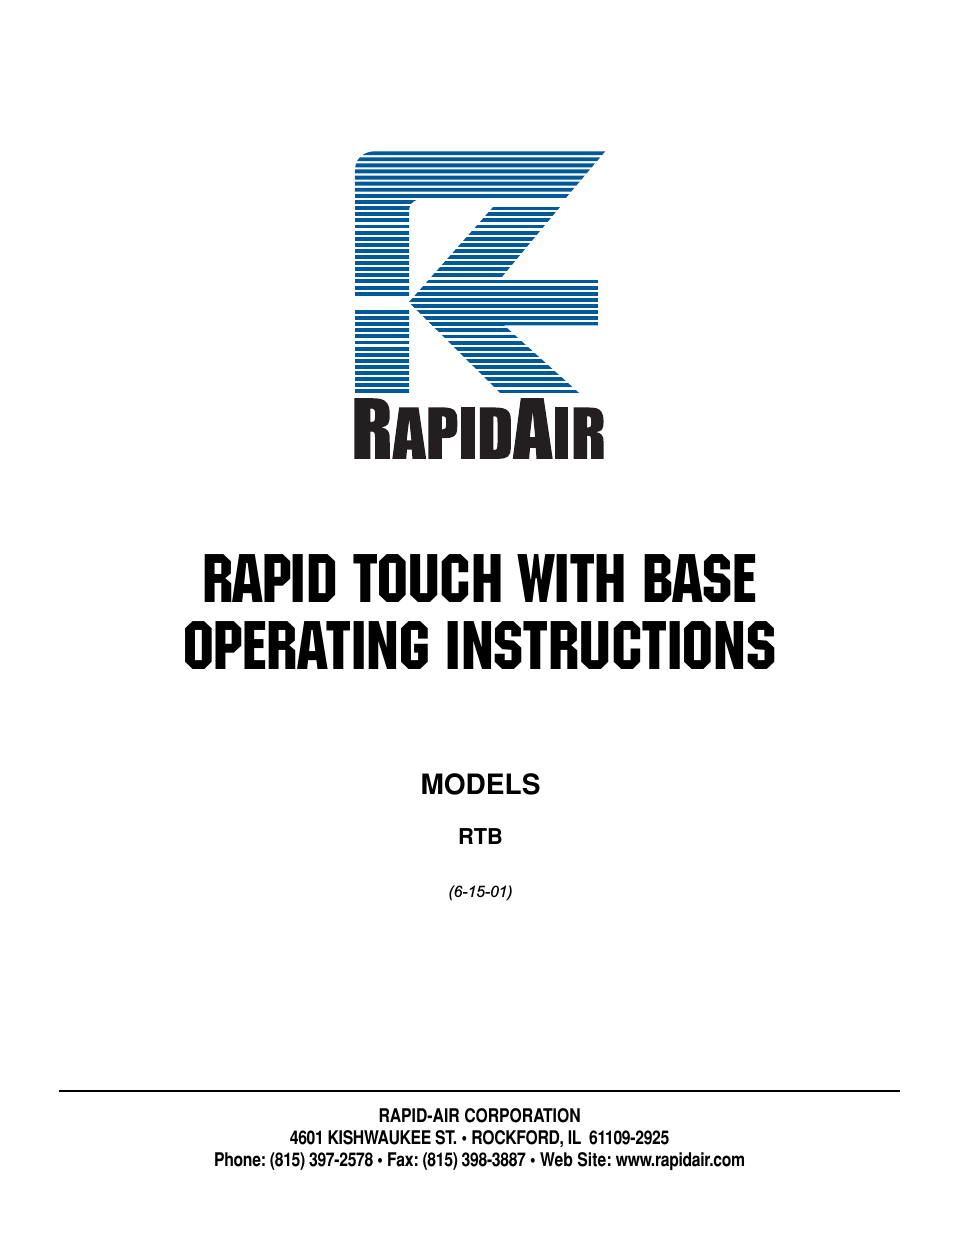 RAPID TOUCH WITH BASE: RTB